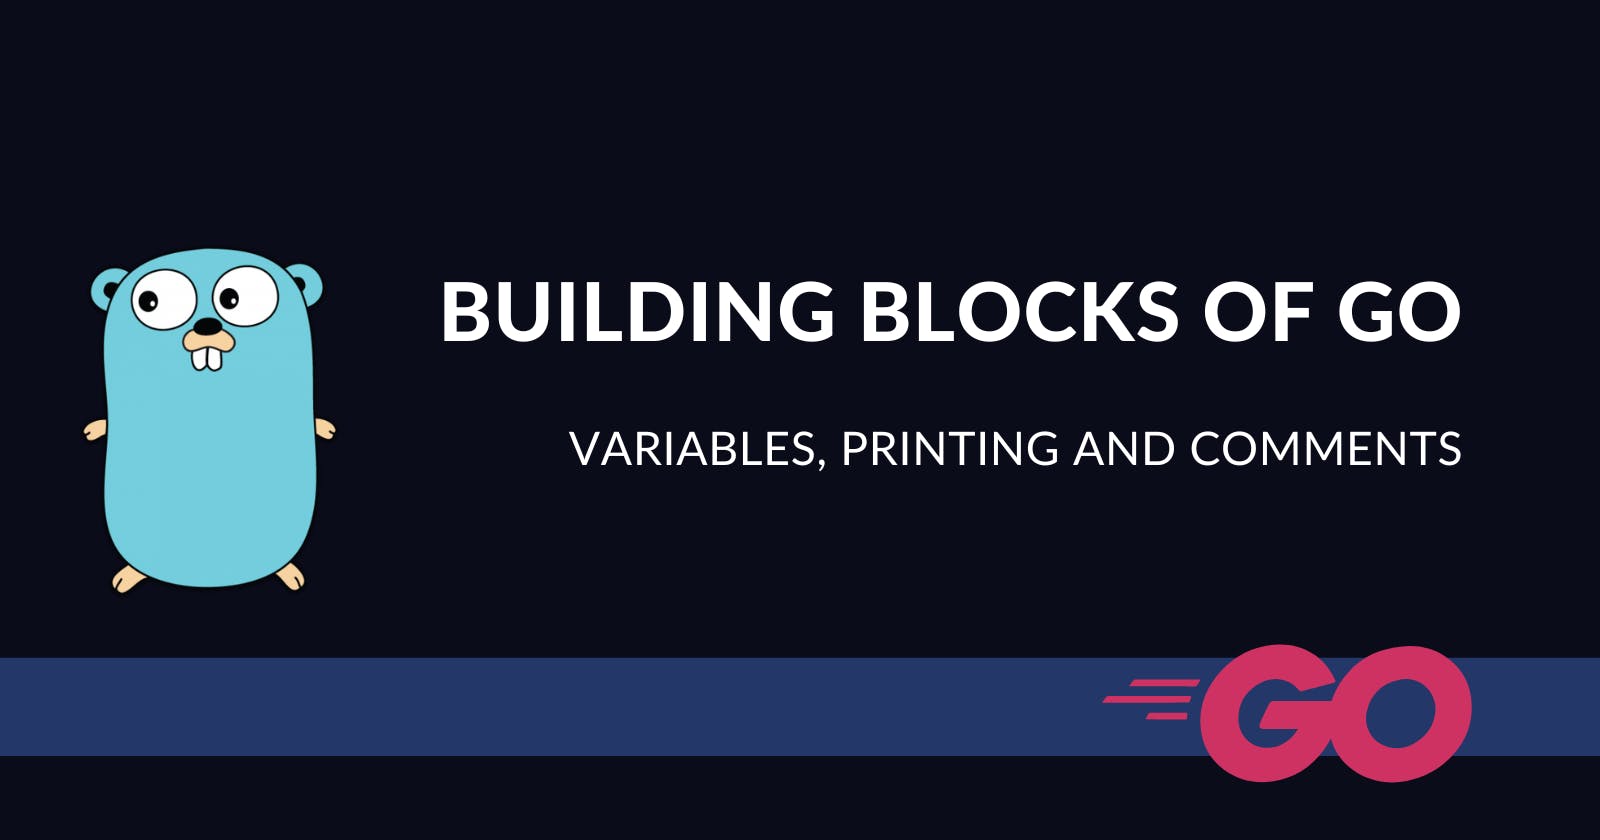 Building Blocks of Go: Variables and Comments (Blog 3 of the Go Series)